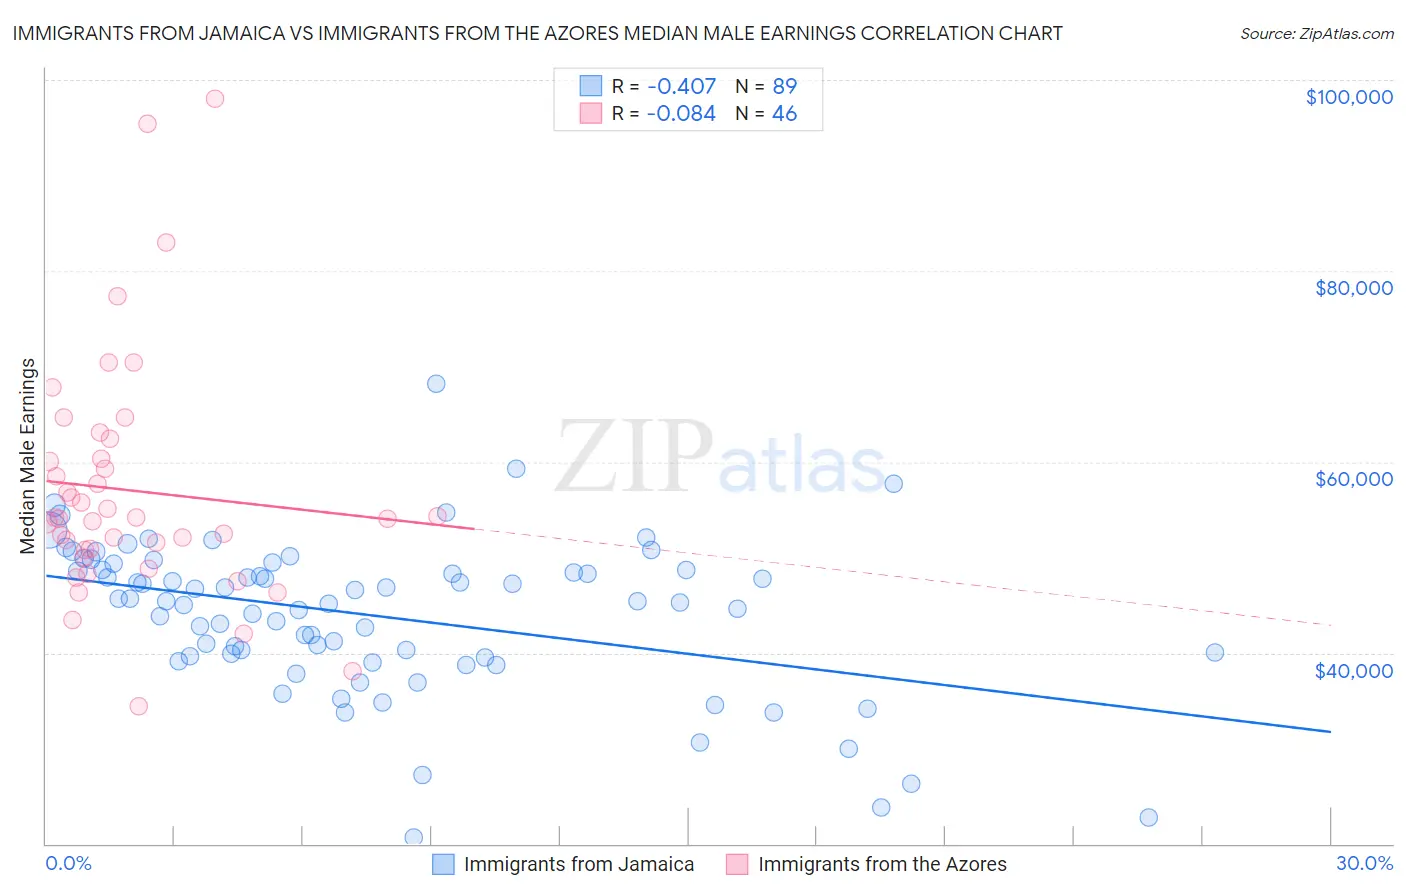 Immigrants from Jamaica vs Immigrants from the Azores Median Male Earnings